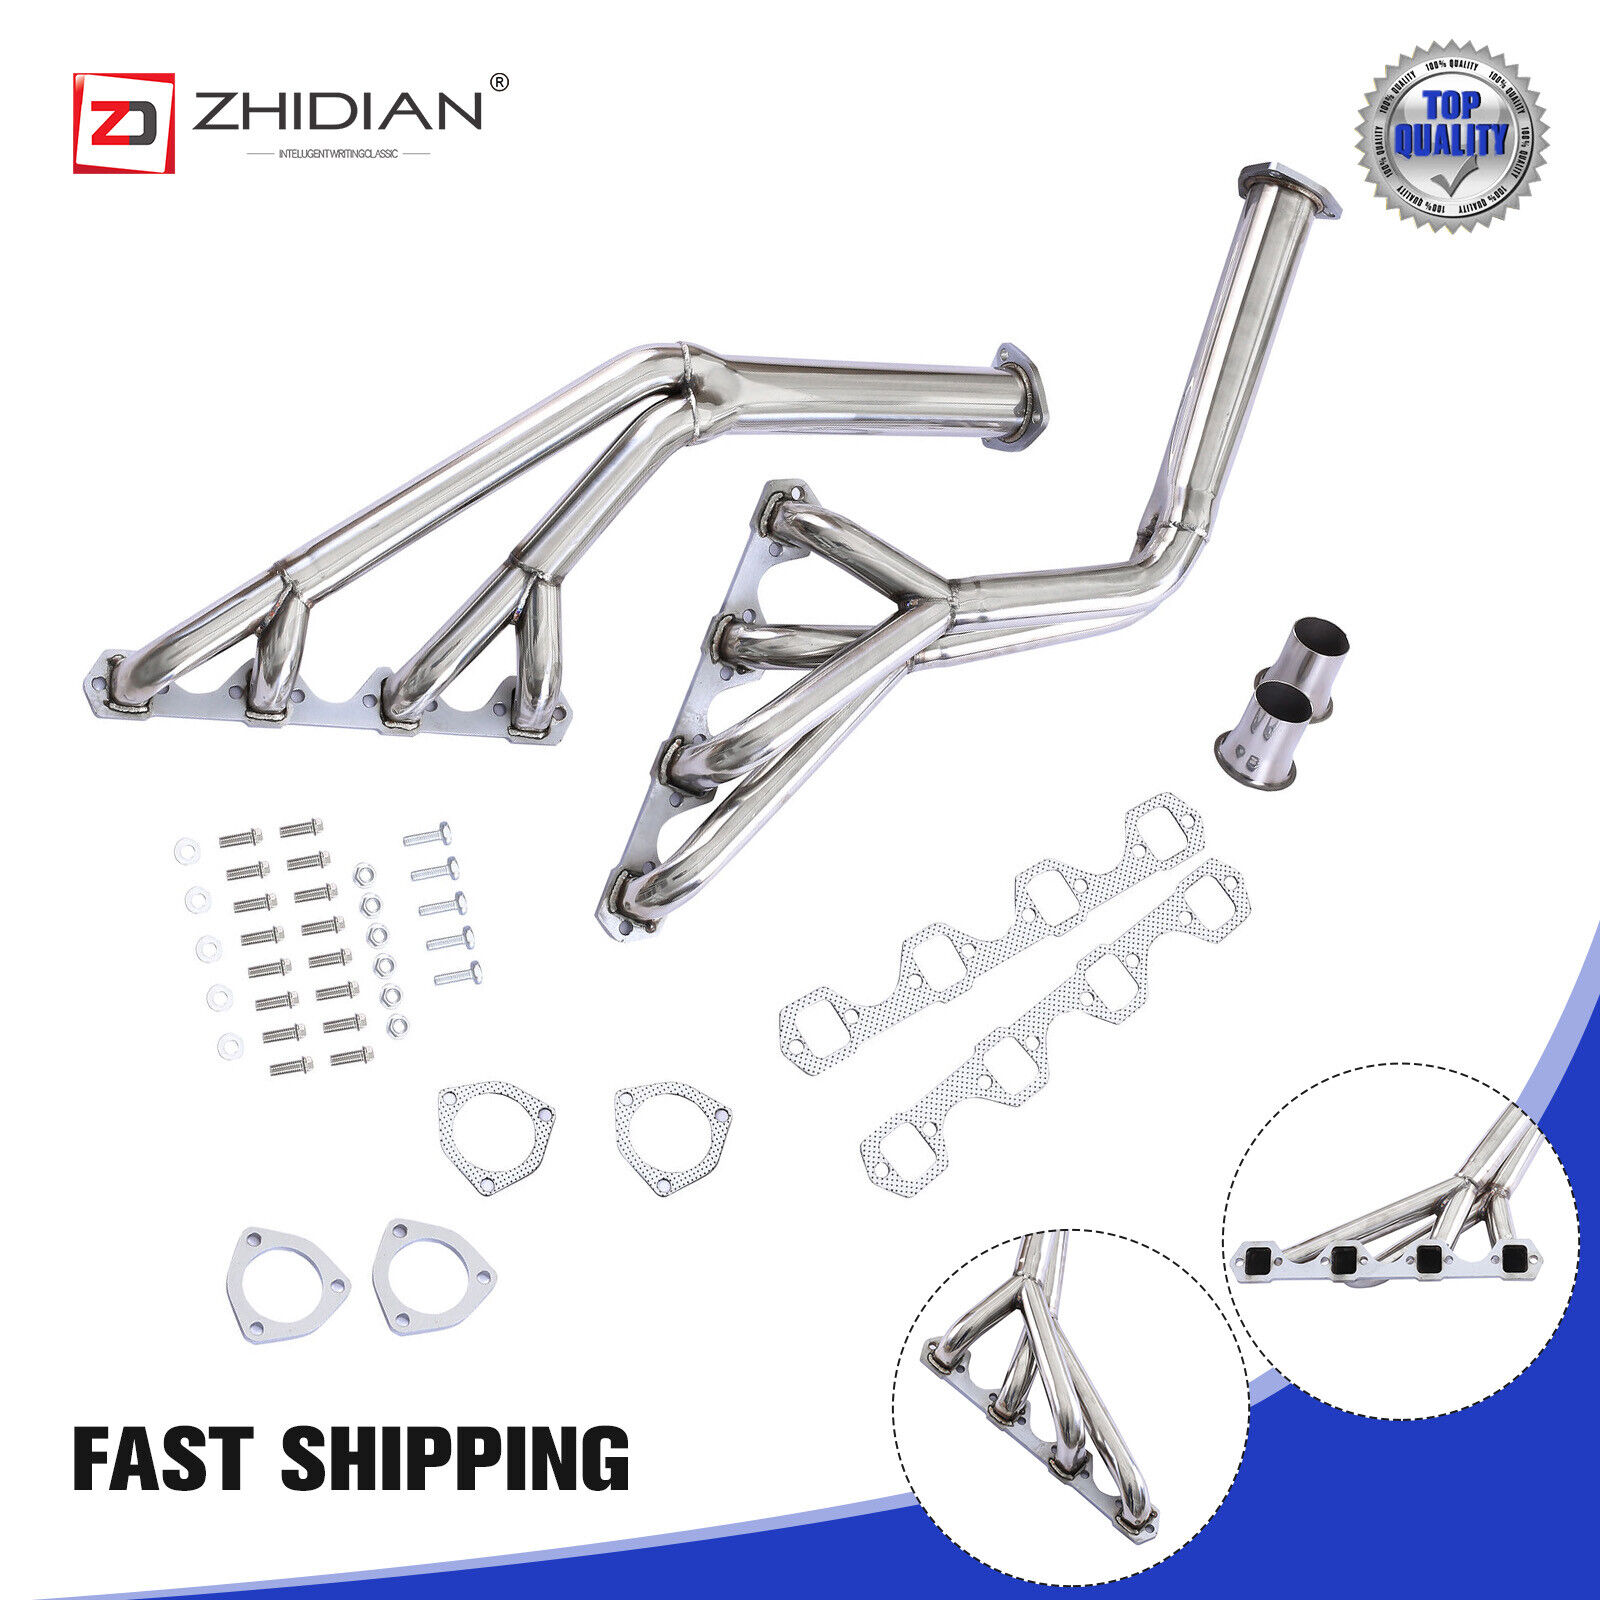 Stainless Steel Manifold Header For 64-70 Mustang 260/289/302 V8 Tri-y Header